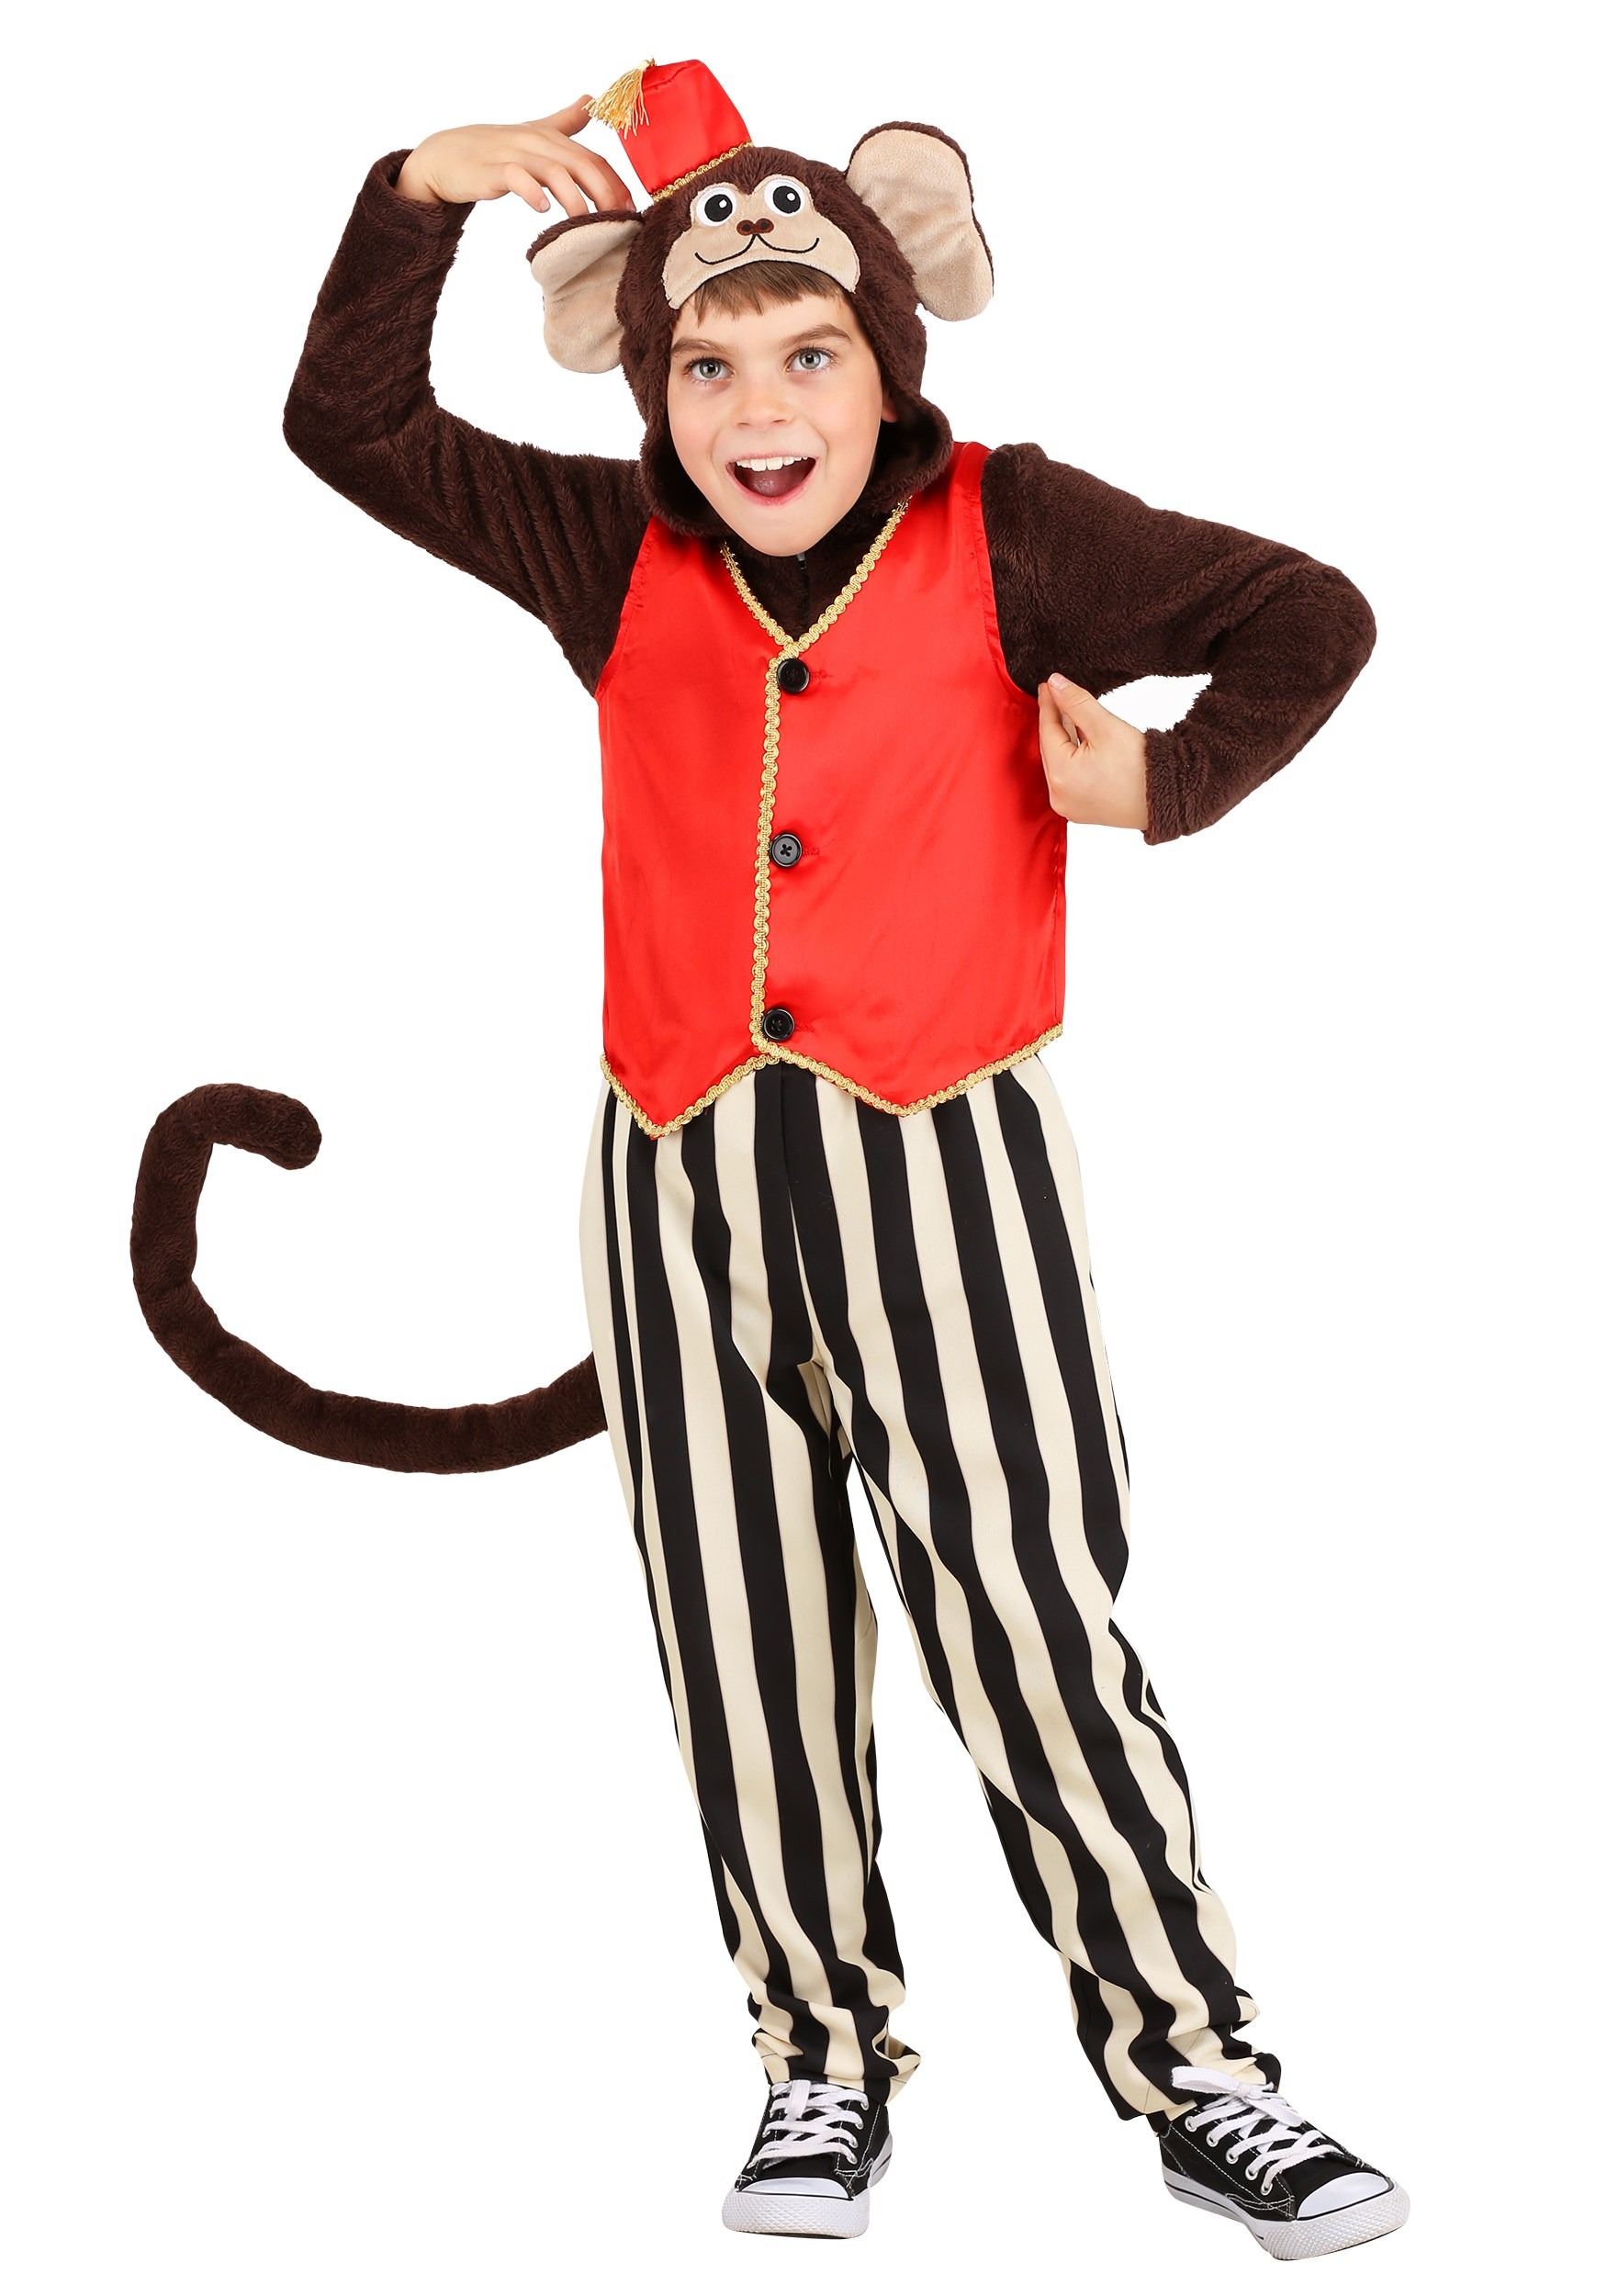 Photos - Fancy Dress FUN Costumes Circus Monkey Costume for Kids | Circus Costumes Brown/Re